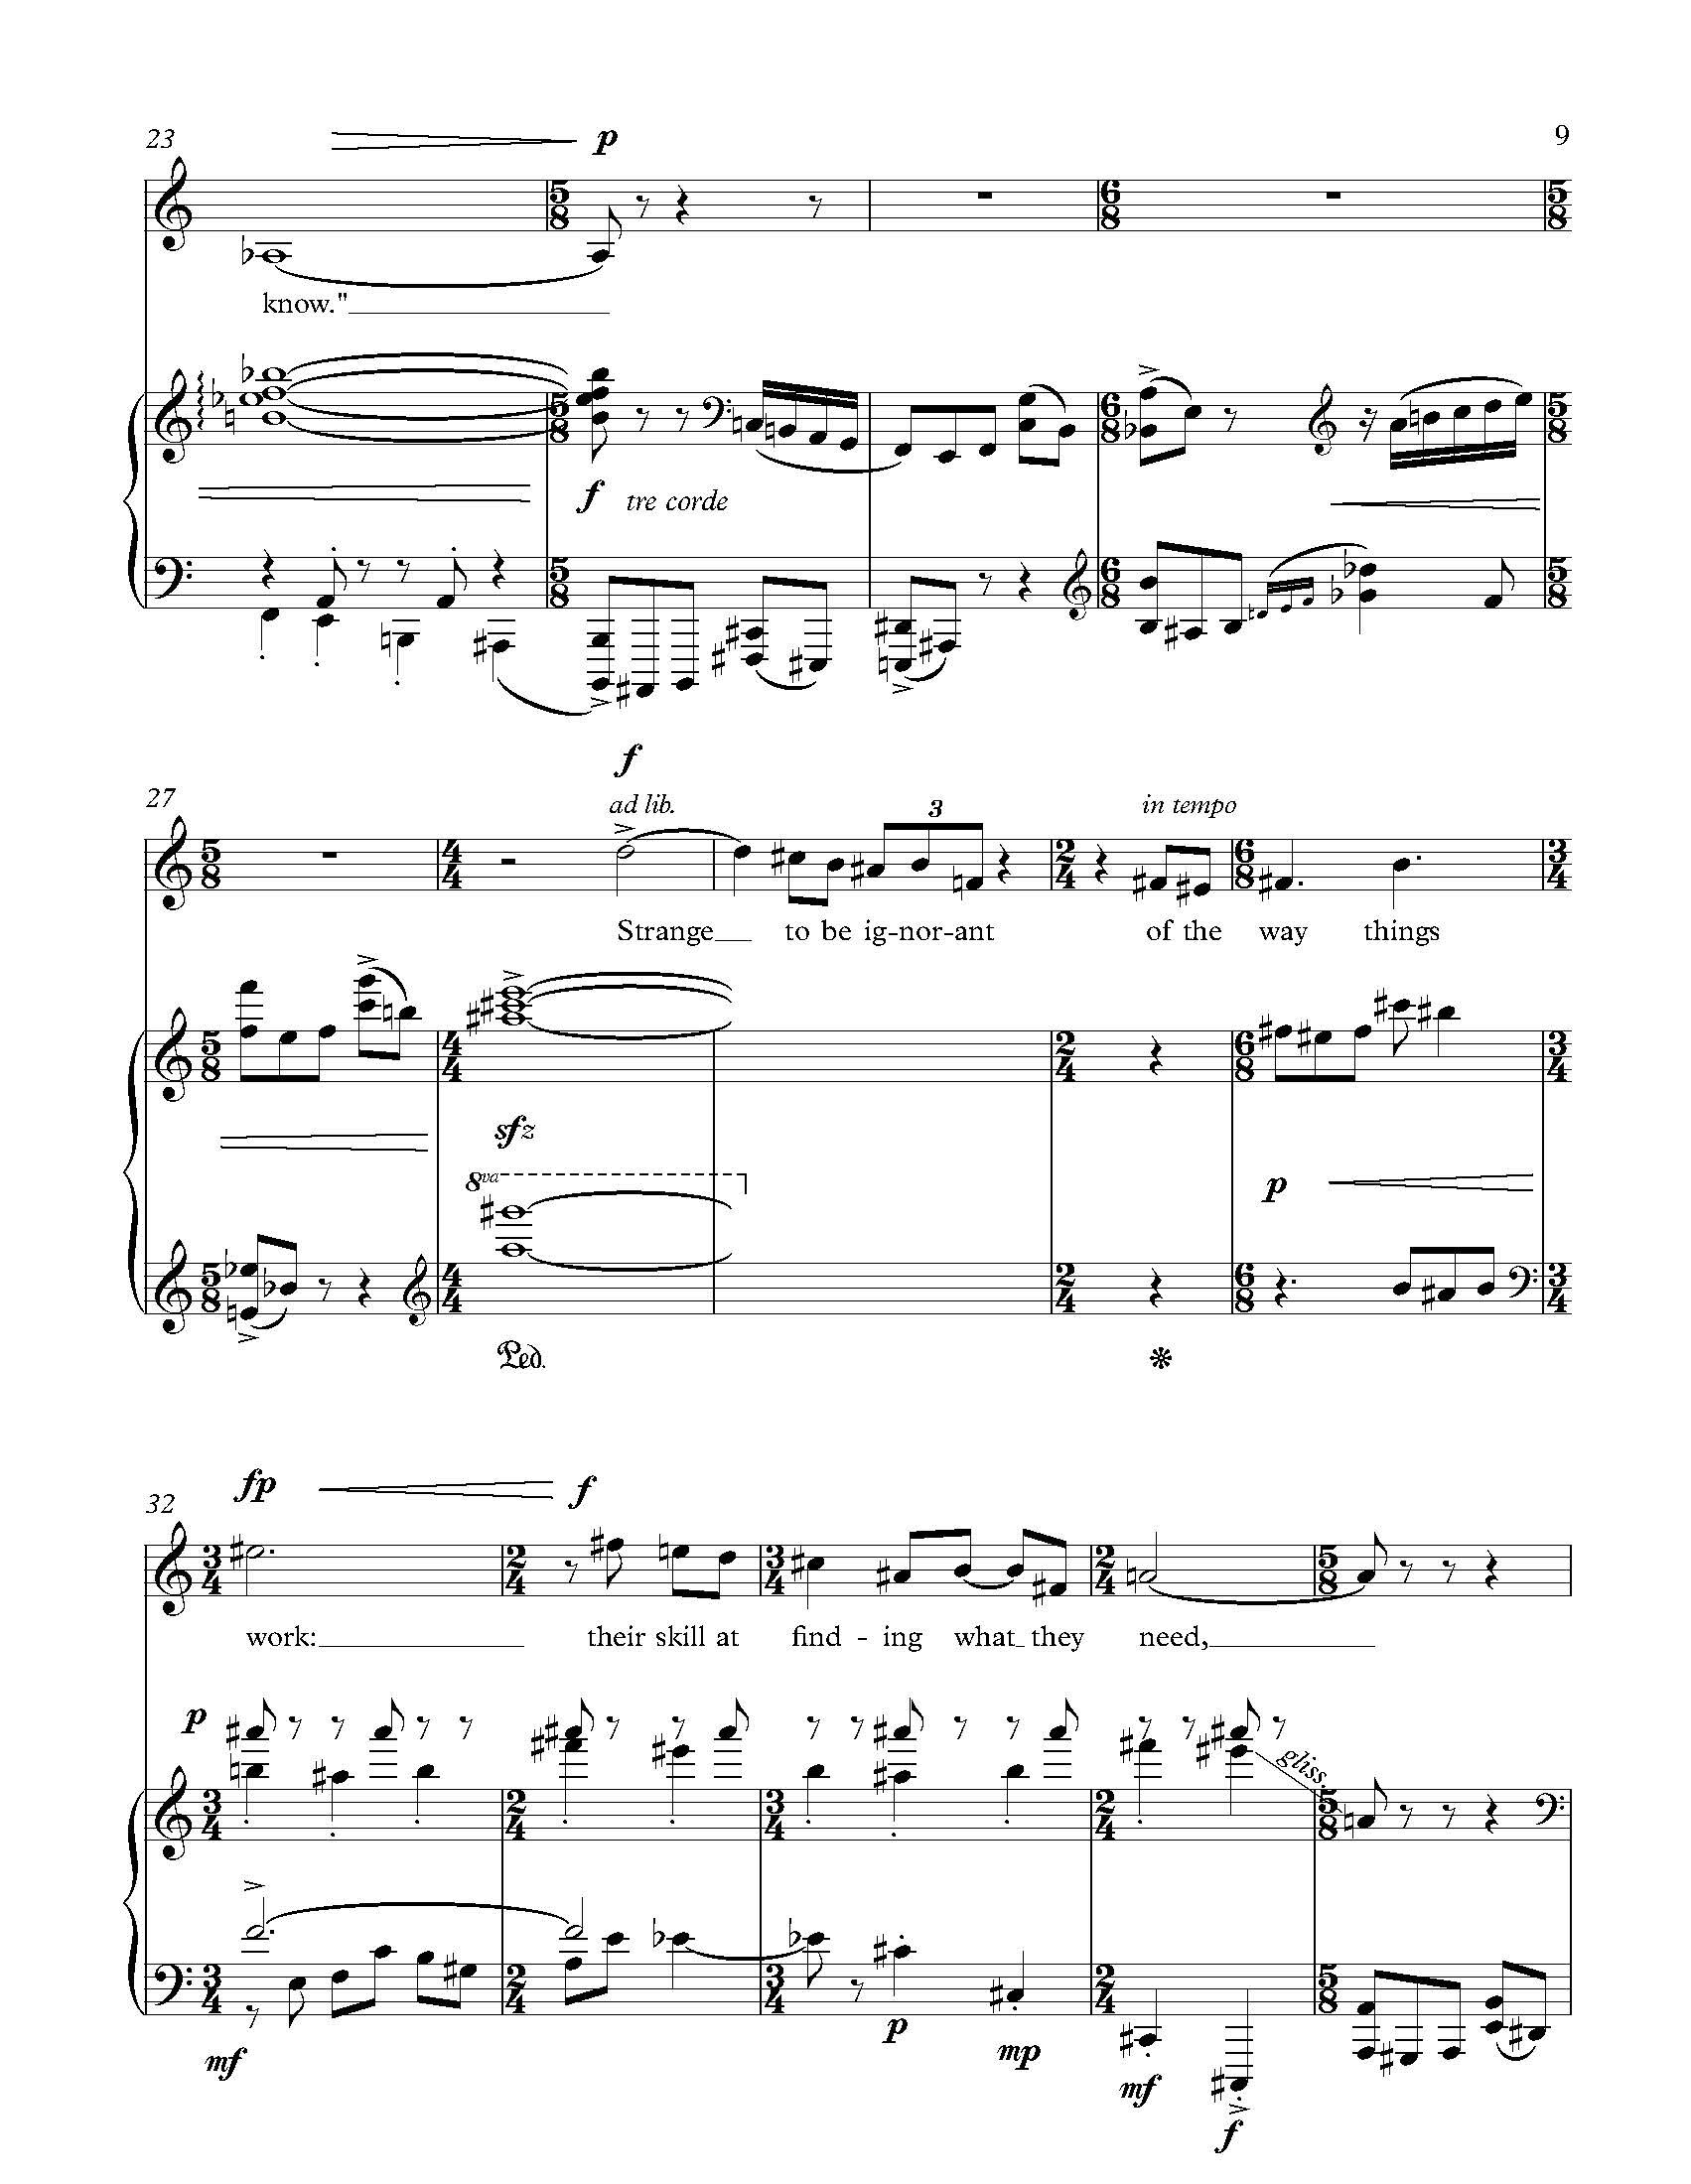 The Explosion - Complete Score_Page_15.jpg